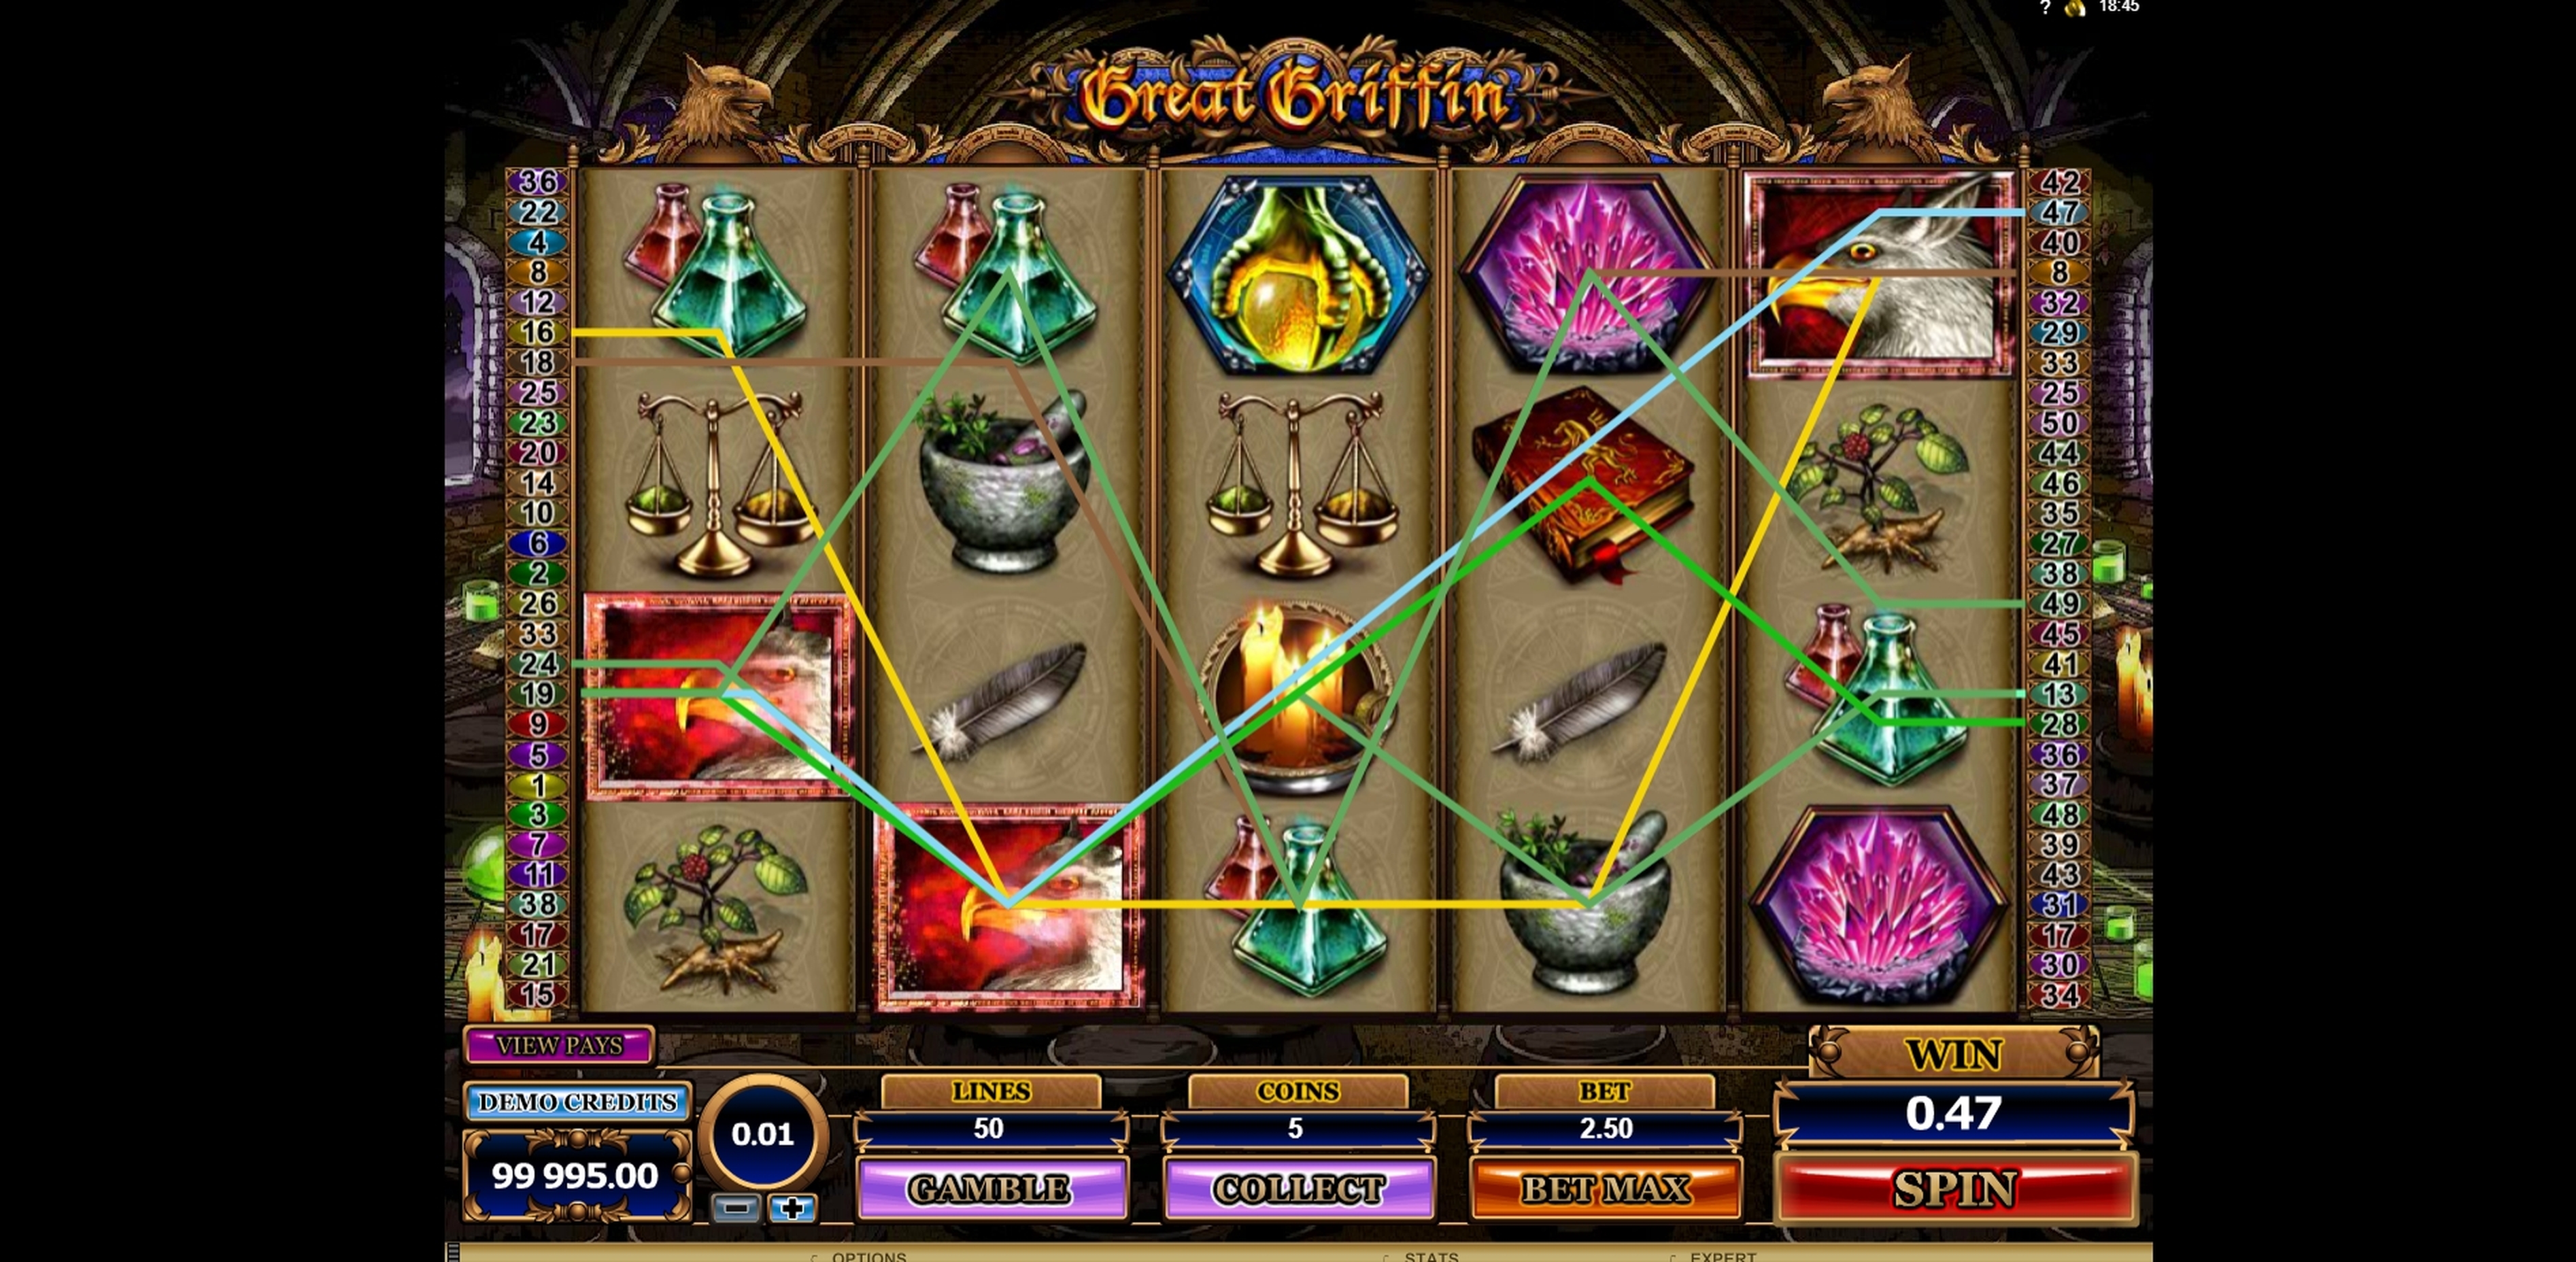 Win Money in Great Griffin Free Slot Game by Microgaming